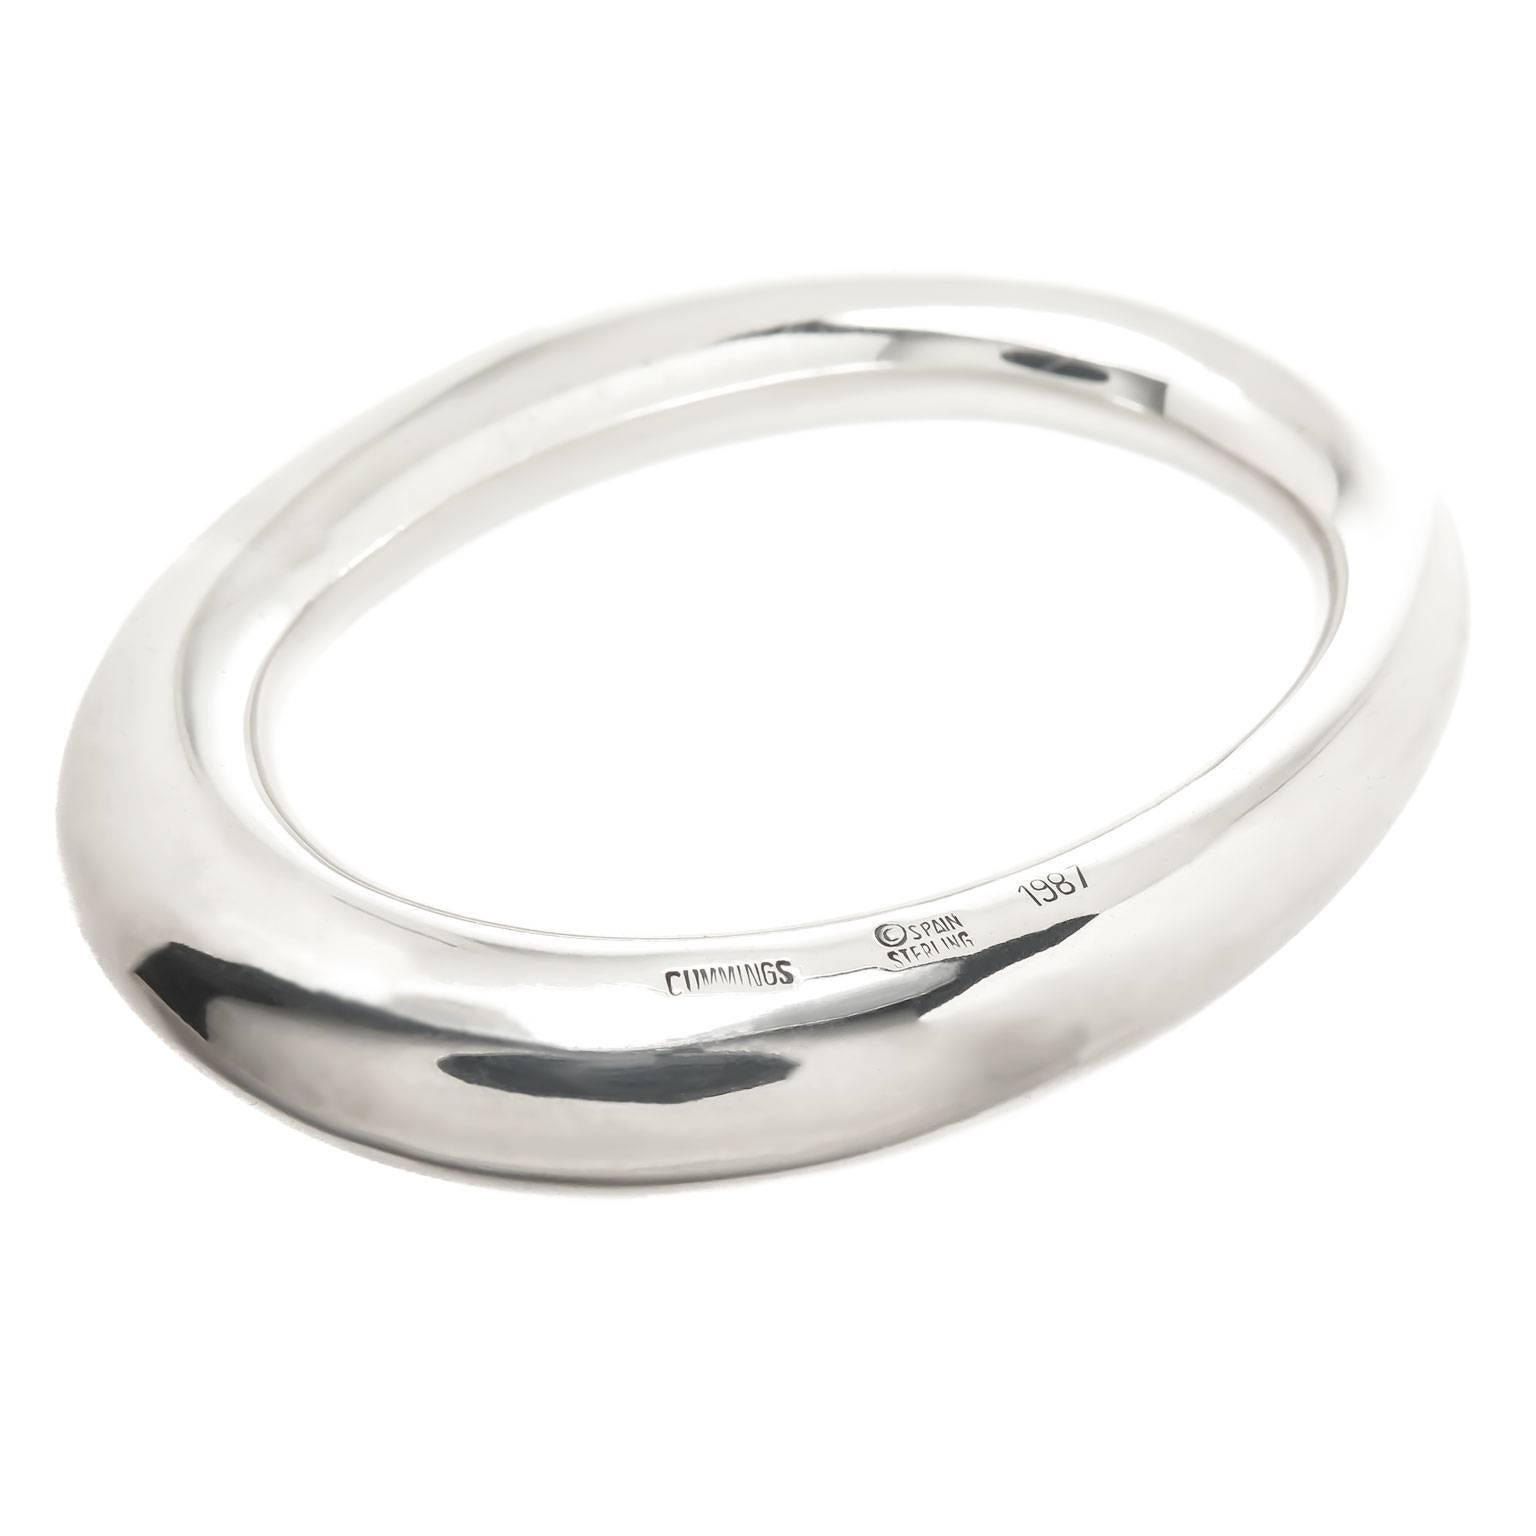 Circa 1980s Angela Cummings Sterling Silver Bangle Bracelet. The hallow bracelet measures just over 3/8 inch thick with an inside measurement of approximate 7 inch.